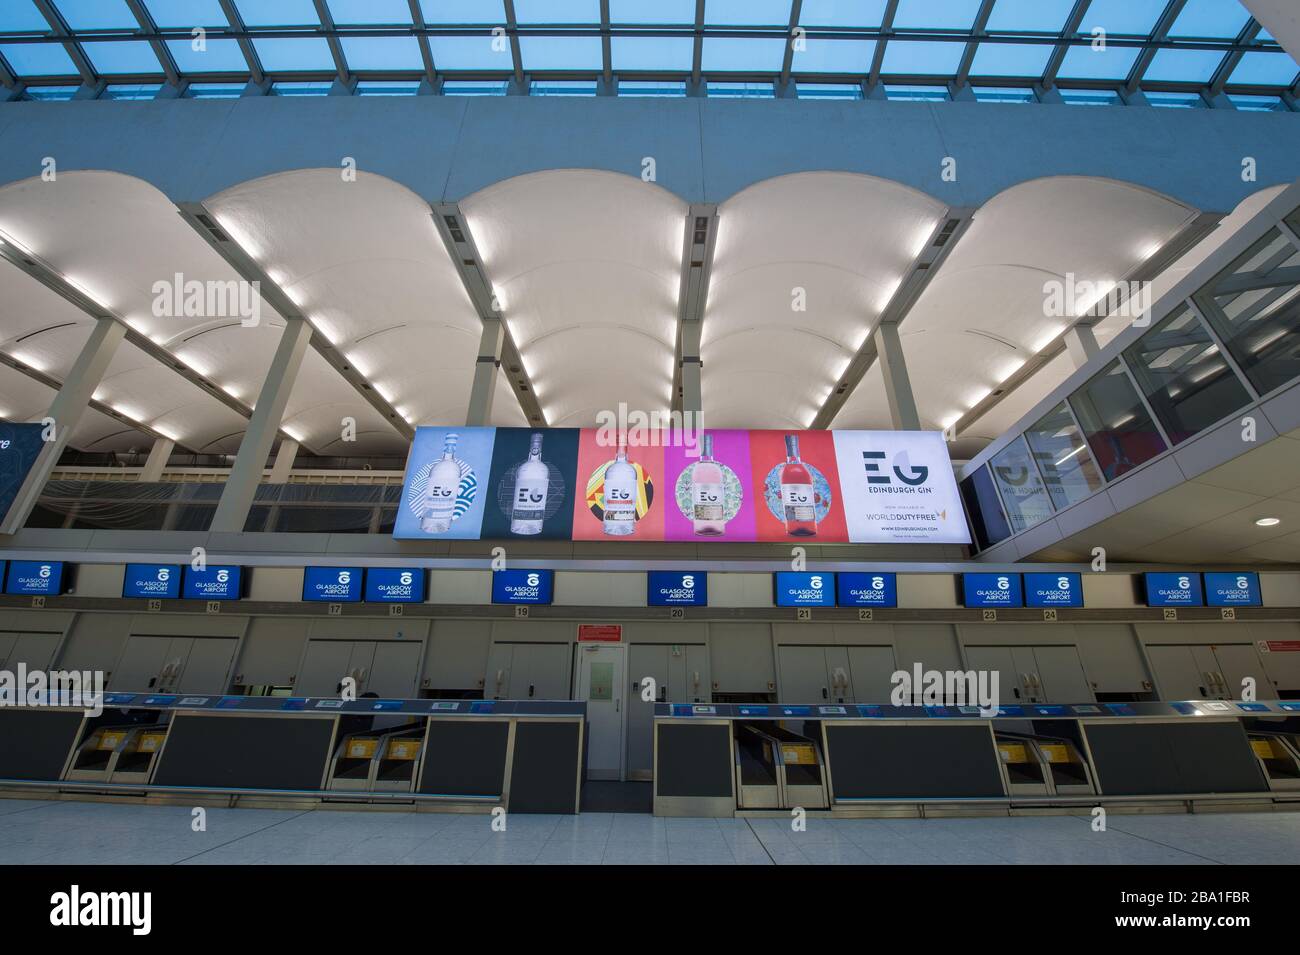 Glasgow, UK. 25th Mar, 2020. Pictured: Views the interior of Glasgow Airport passenger terminal showing the place deserted due to airlines suspending and cancelling flights due to the coronavirus pandemic. Credit: Colin Fisher/Alamy Live News Stock Photo